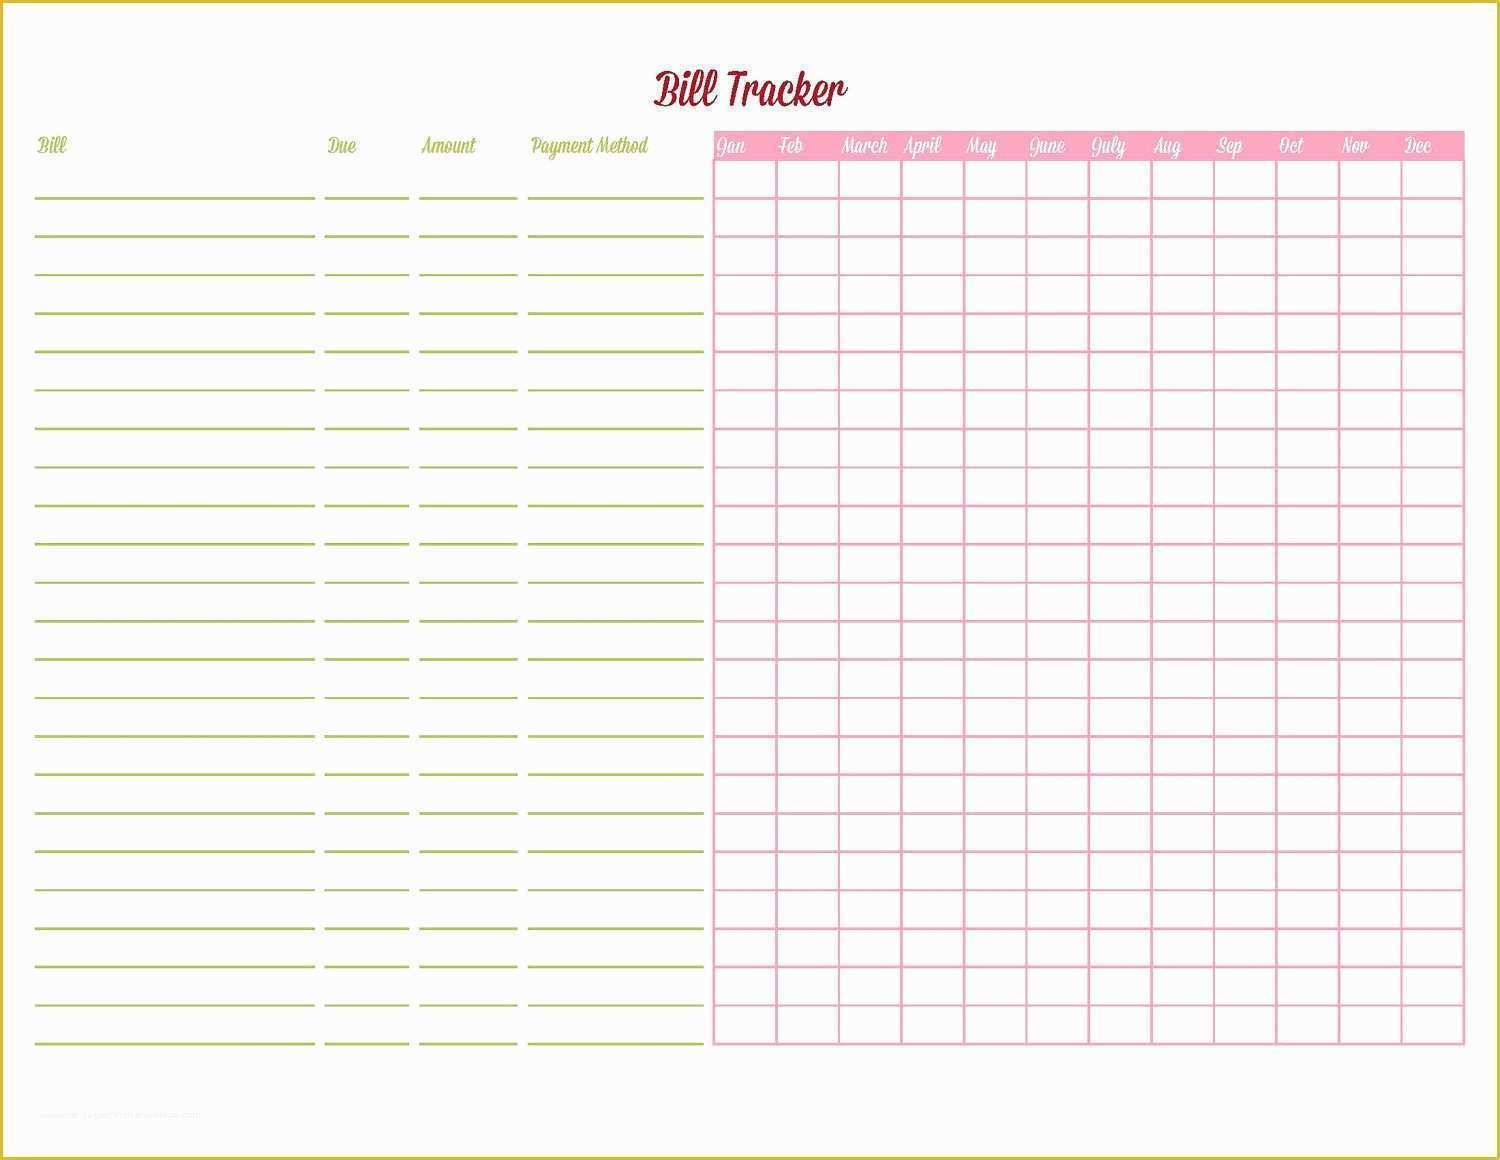 Bill Tracker Template Free Of Bill Tracker Editable Printable Instant by Iheartplanners